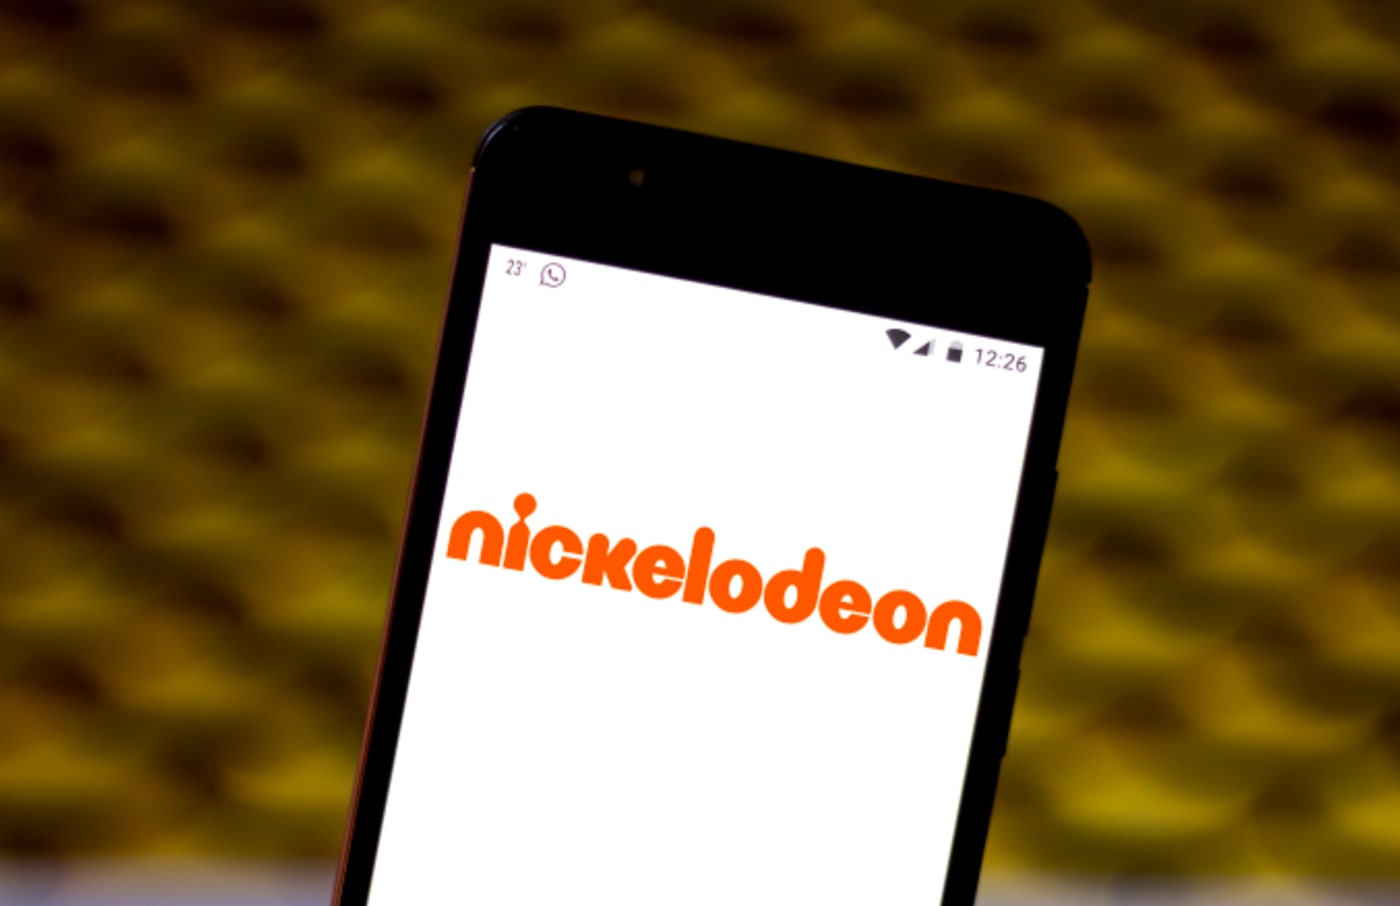 In this photo illustration the Nickelodeon logo